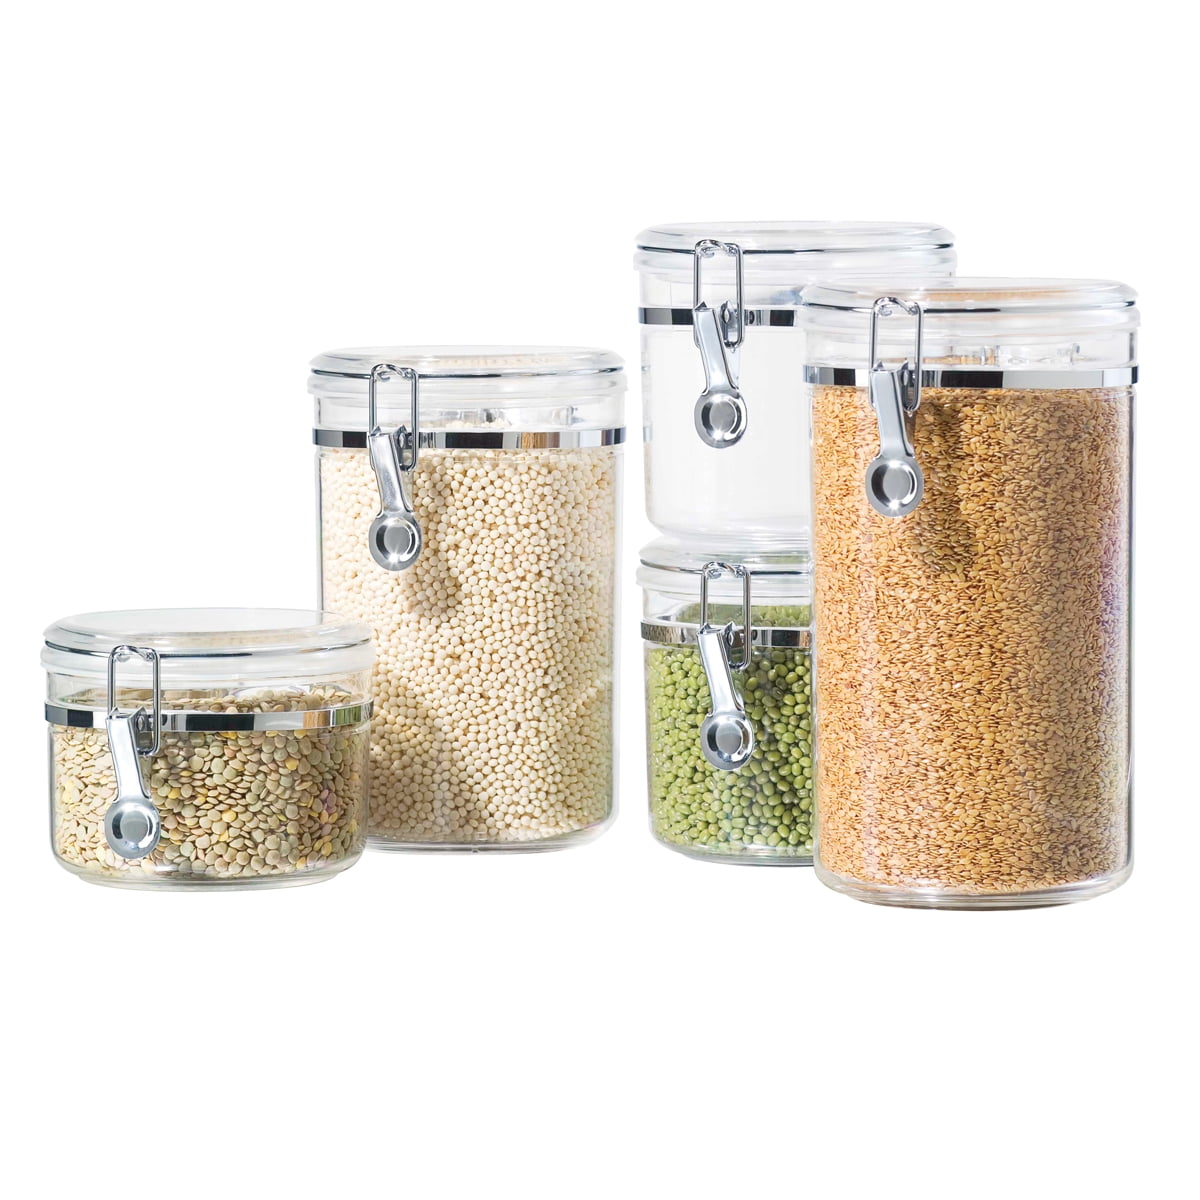 Details about   Airtight Food Storage Container Set 7 PC Set BPA Free Clear Plastic Canisters